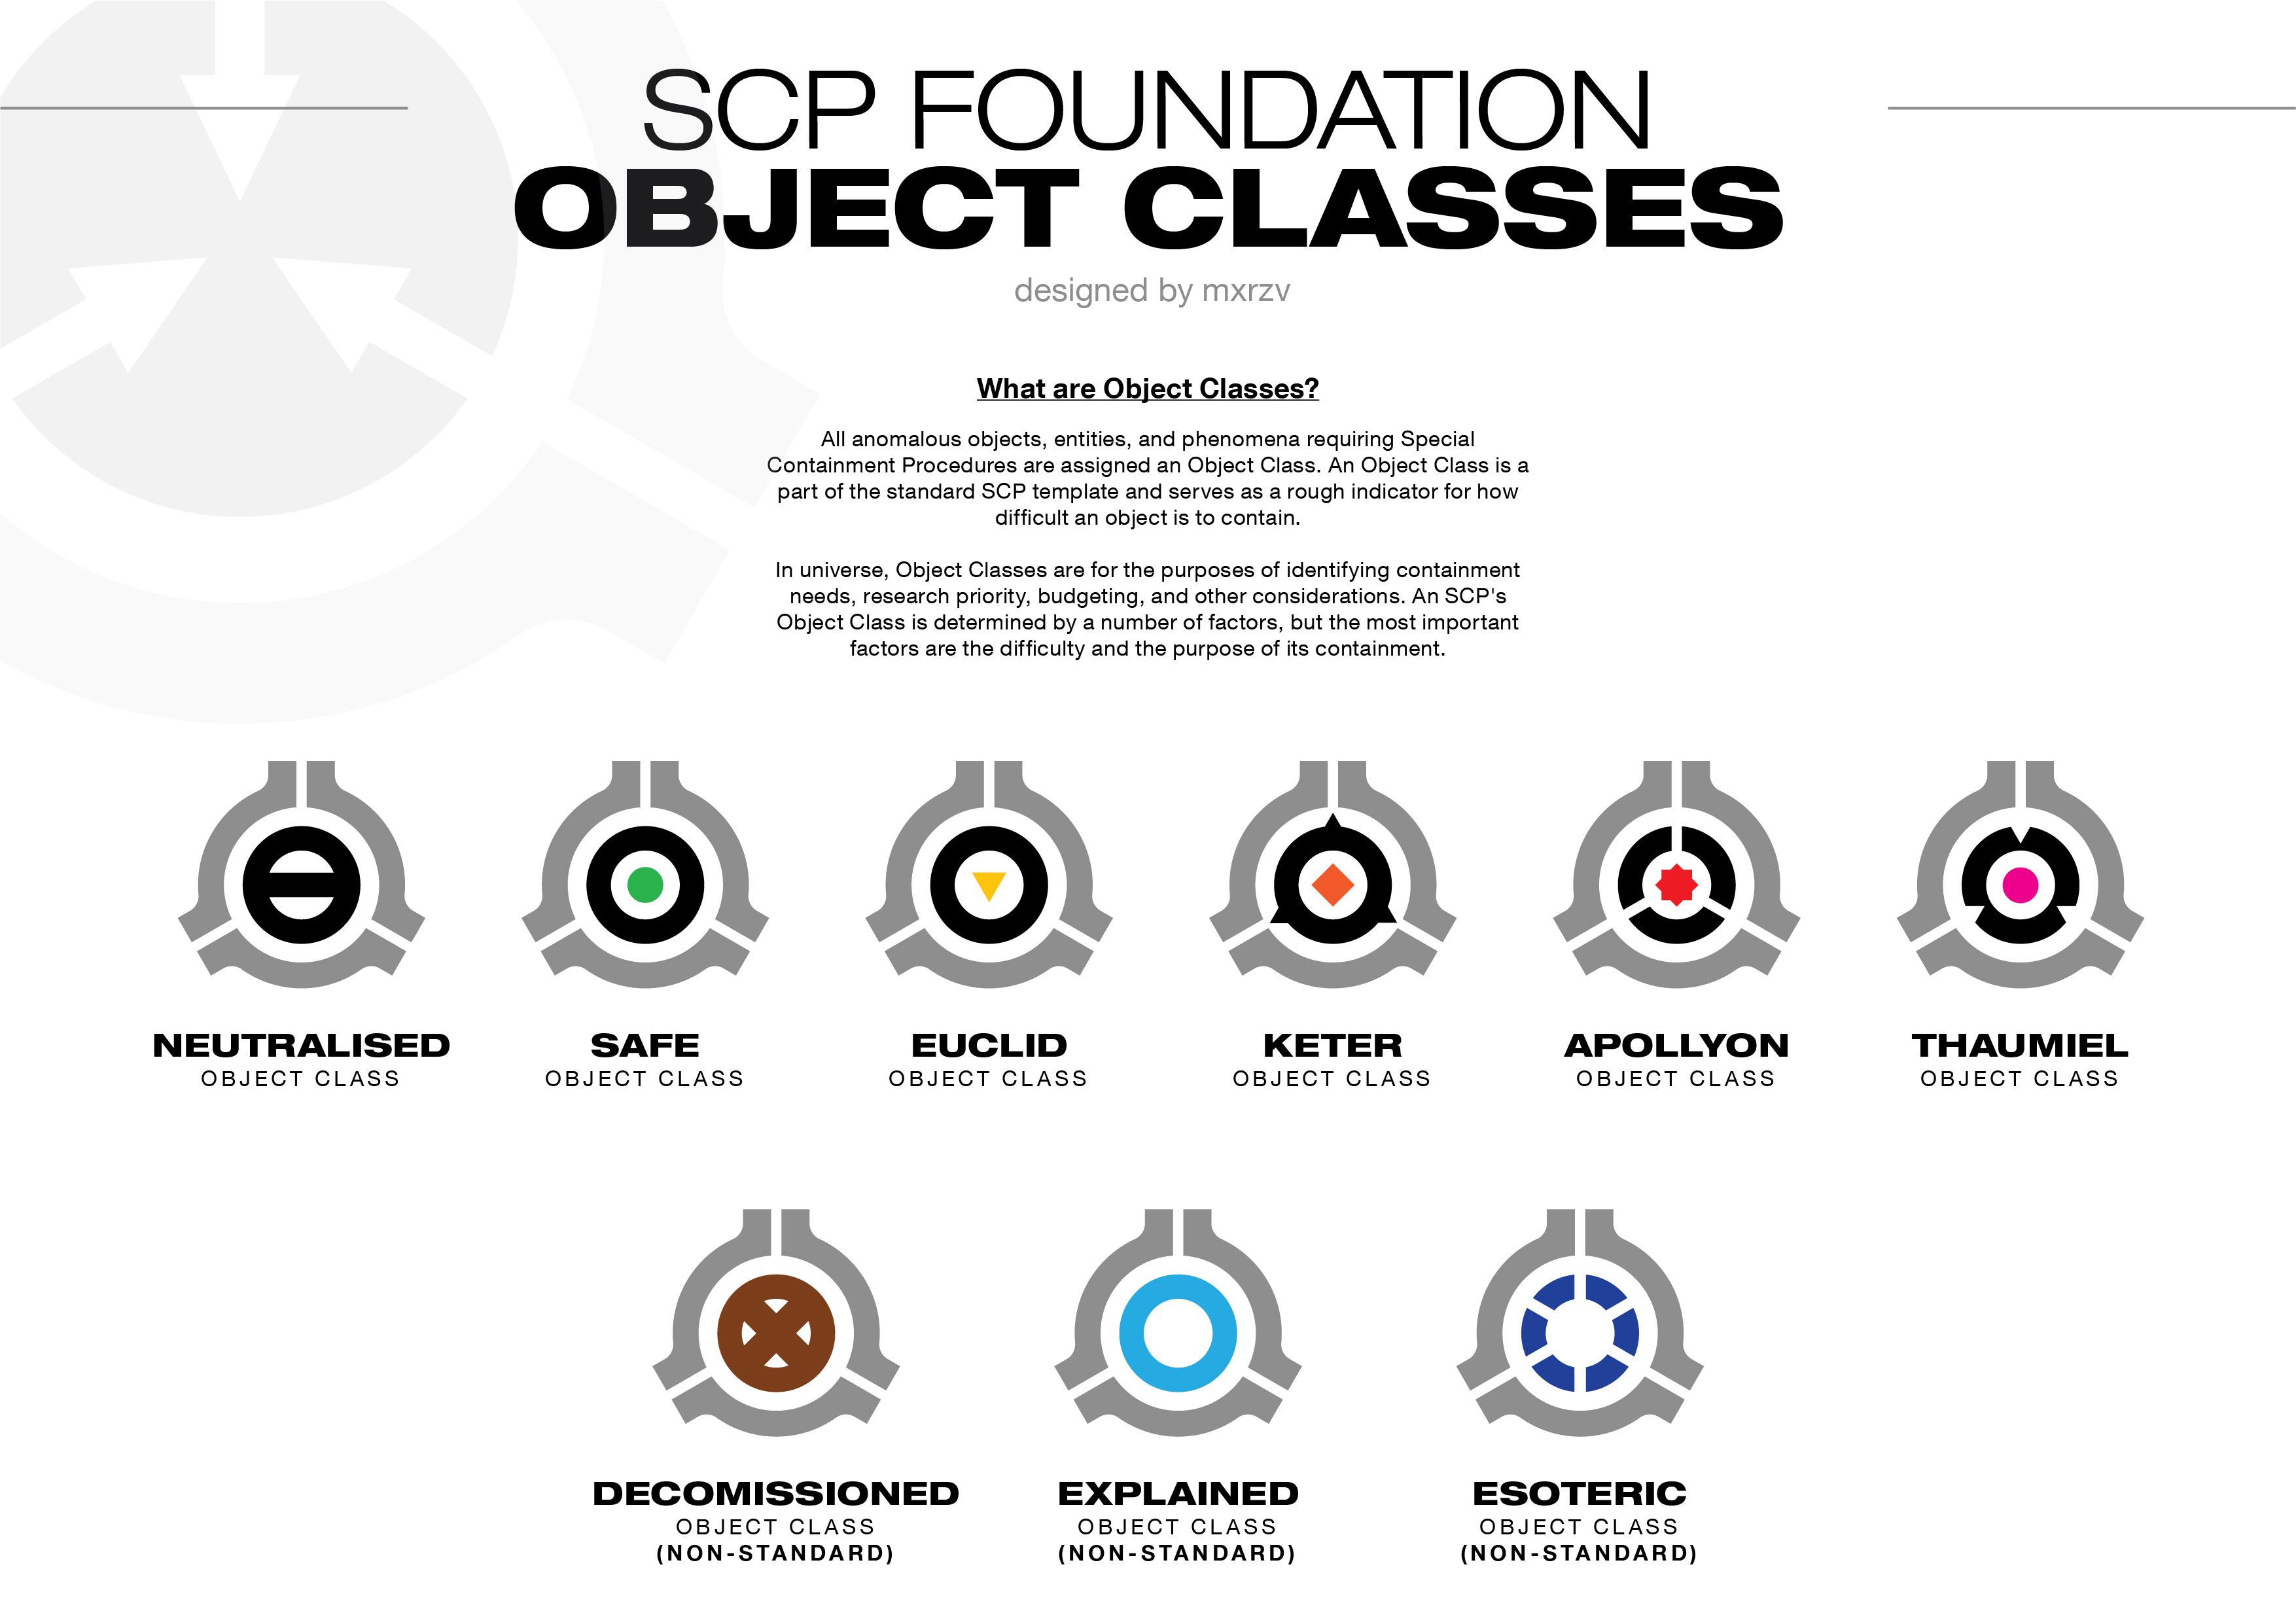 The SCP Foundation, Explained